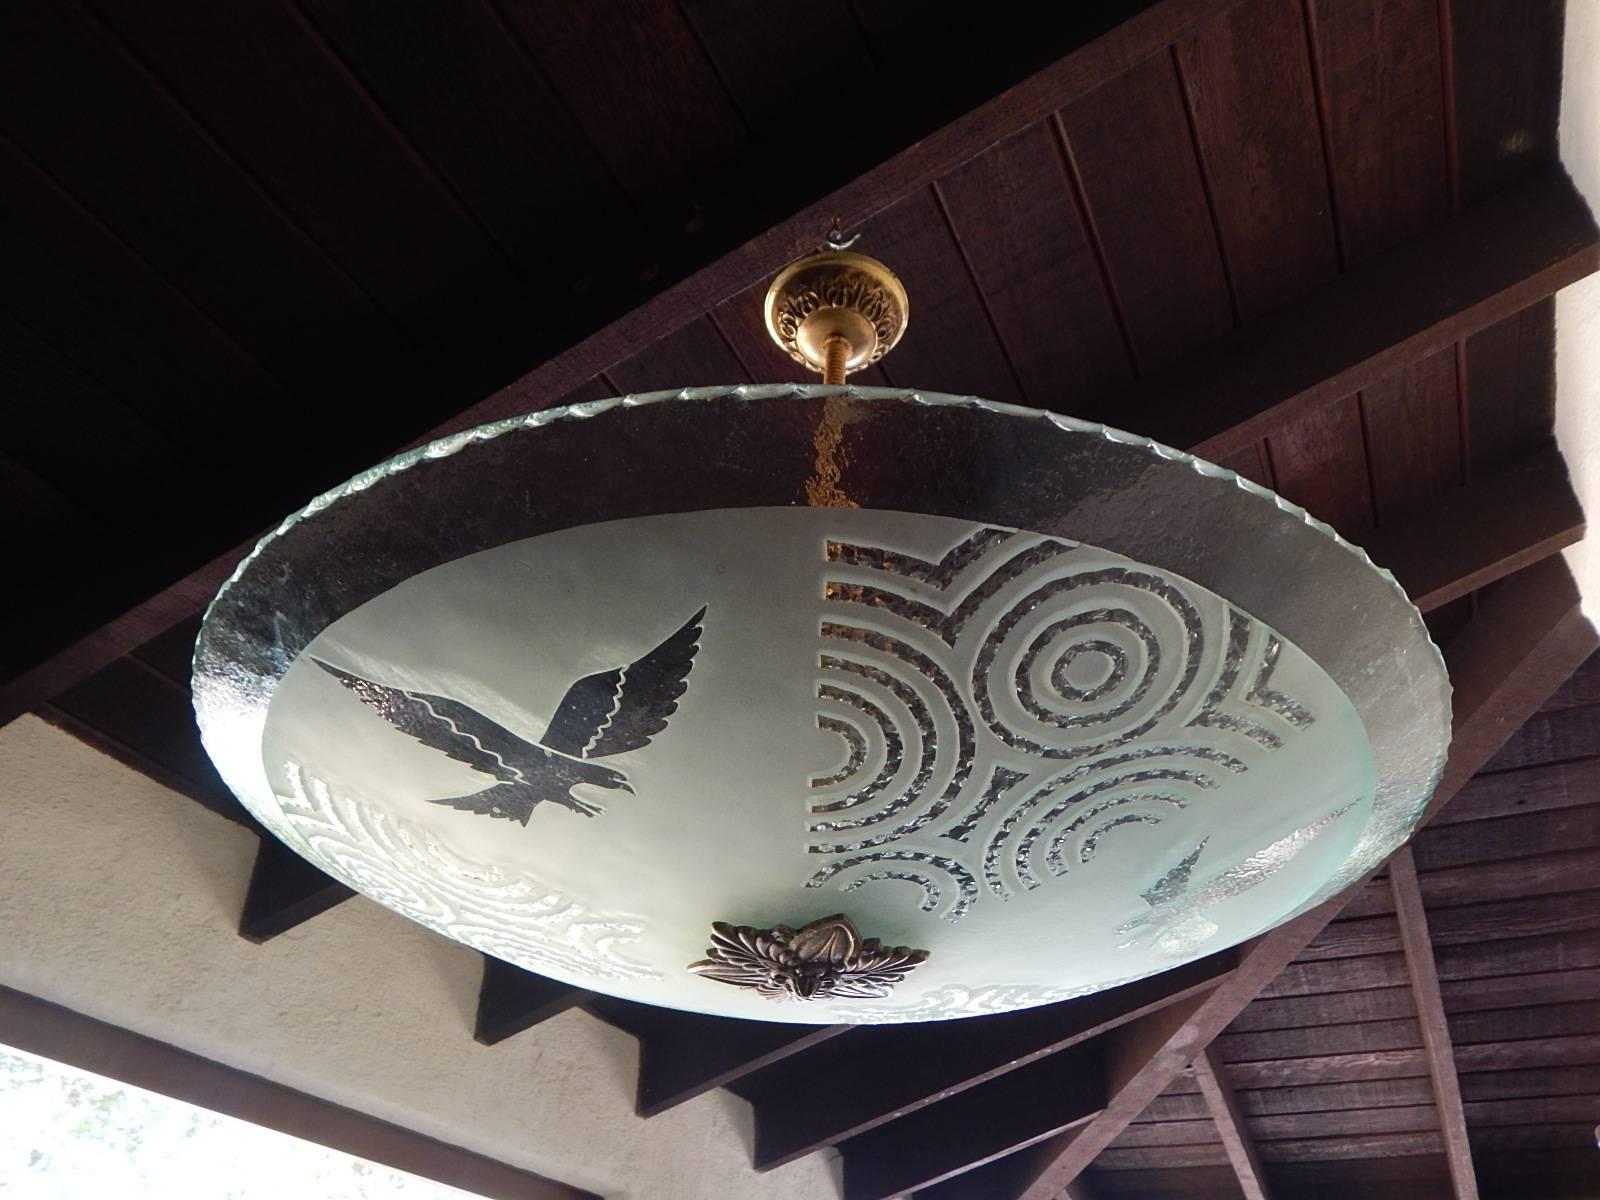 Swedish Art Deco etched glass hanging light fixture. With acid etched eagle motifs. Edges are hammer chipped. With three standard base sockets. Price includes complete rewiring. Made in Sweden in the 1930s. Contact us with any further questions.